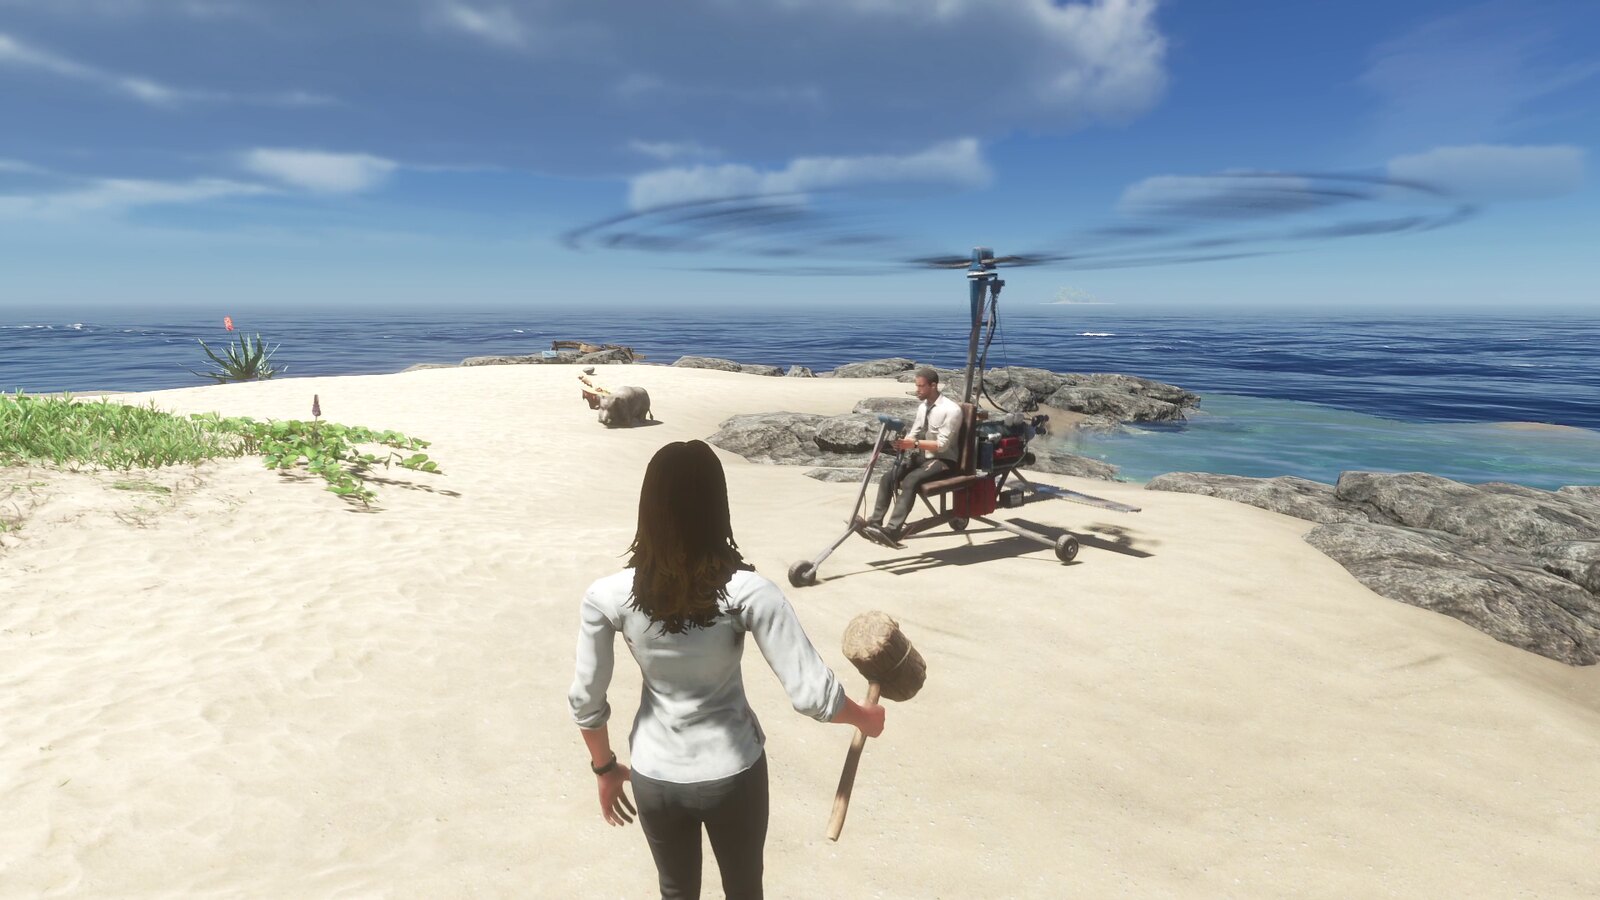 Screenshot for the game Stranded Deep